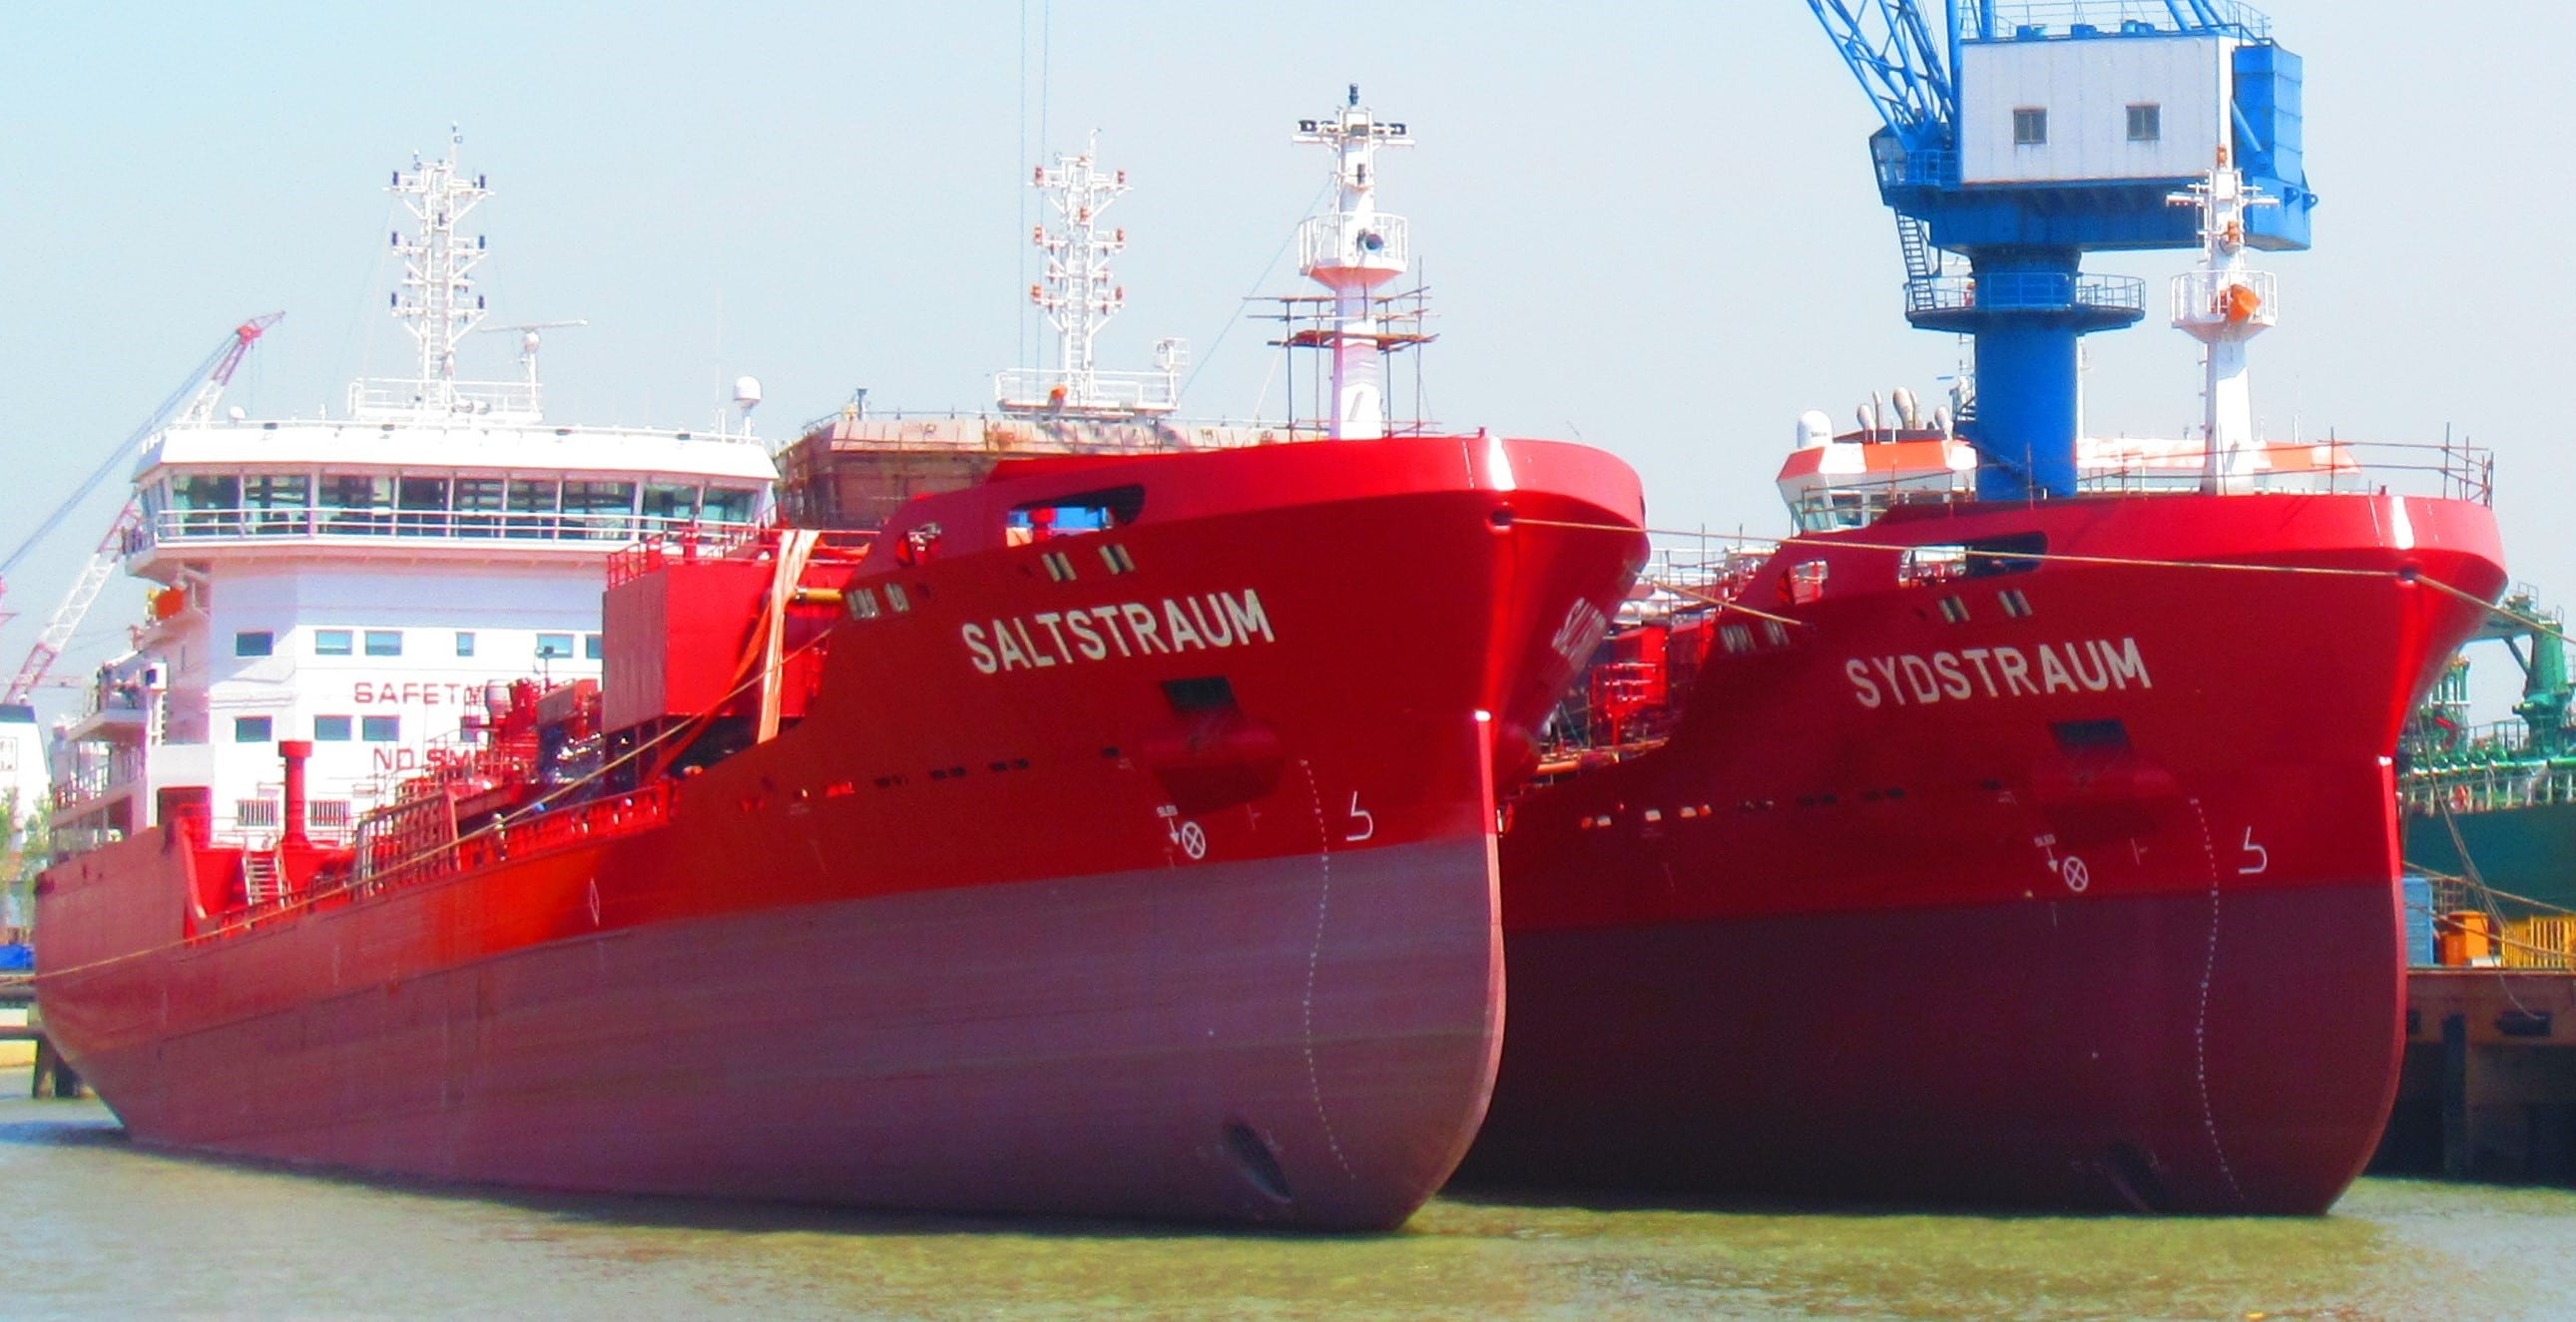 MT SALTSTRAUM Delivered; MT SYDSTRAUM on Sea Trial